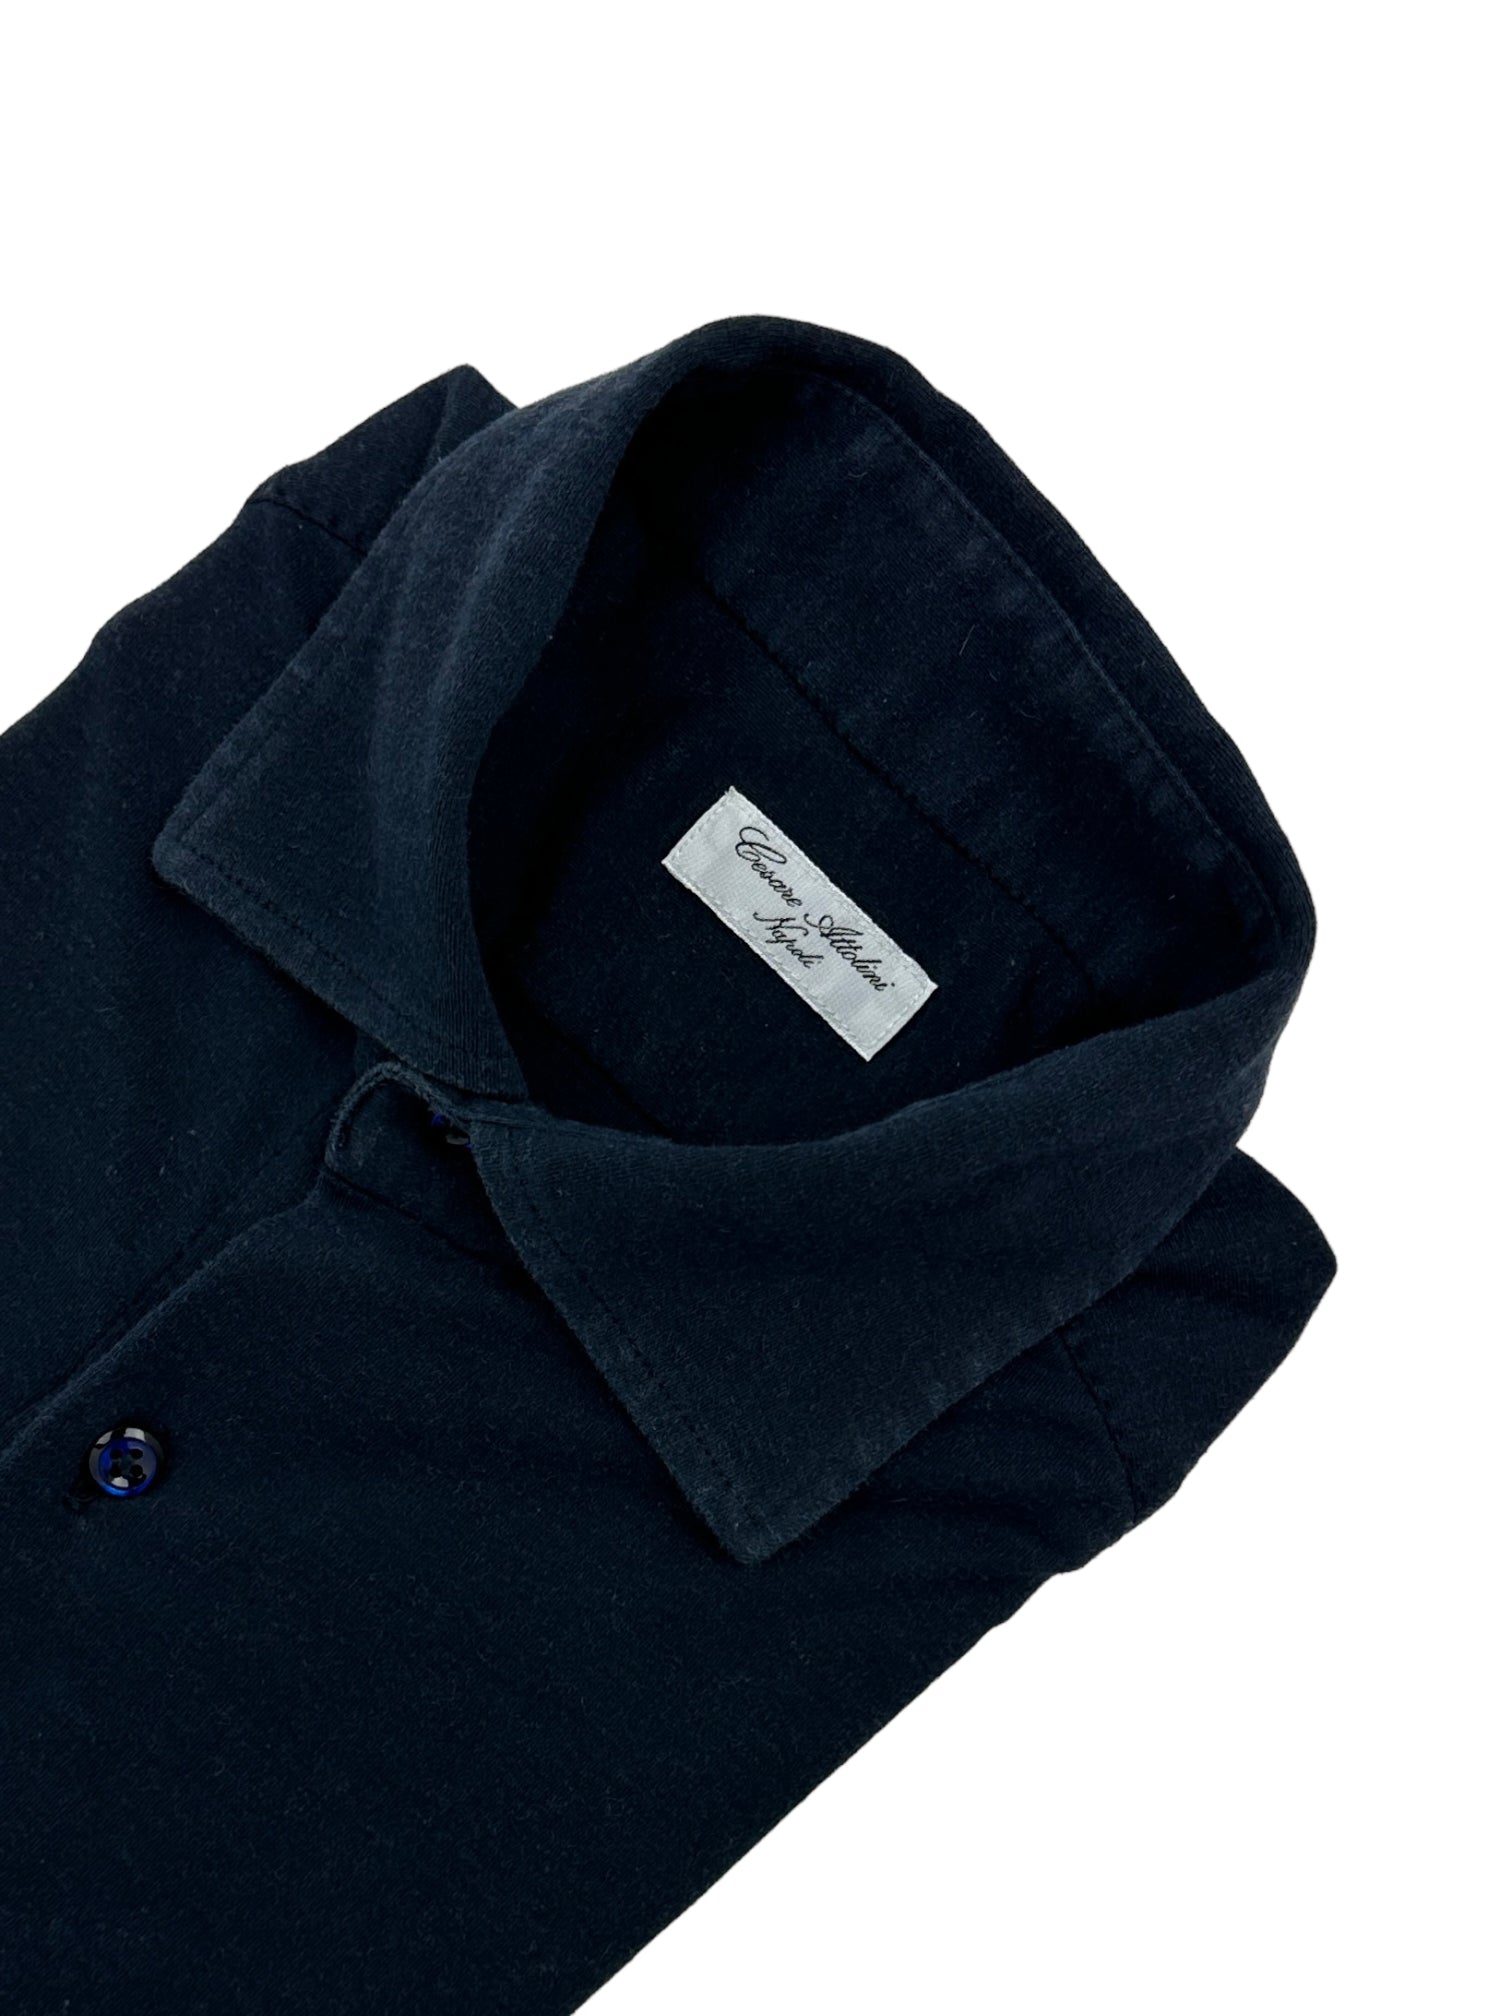 Cesare Attolini Navy Knitted Shirt